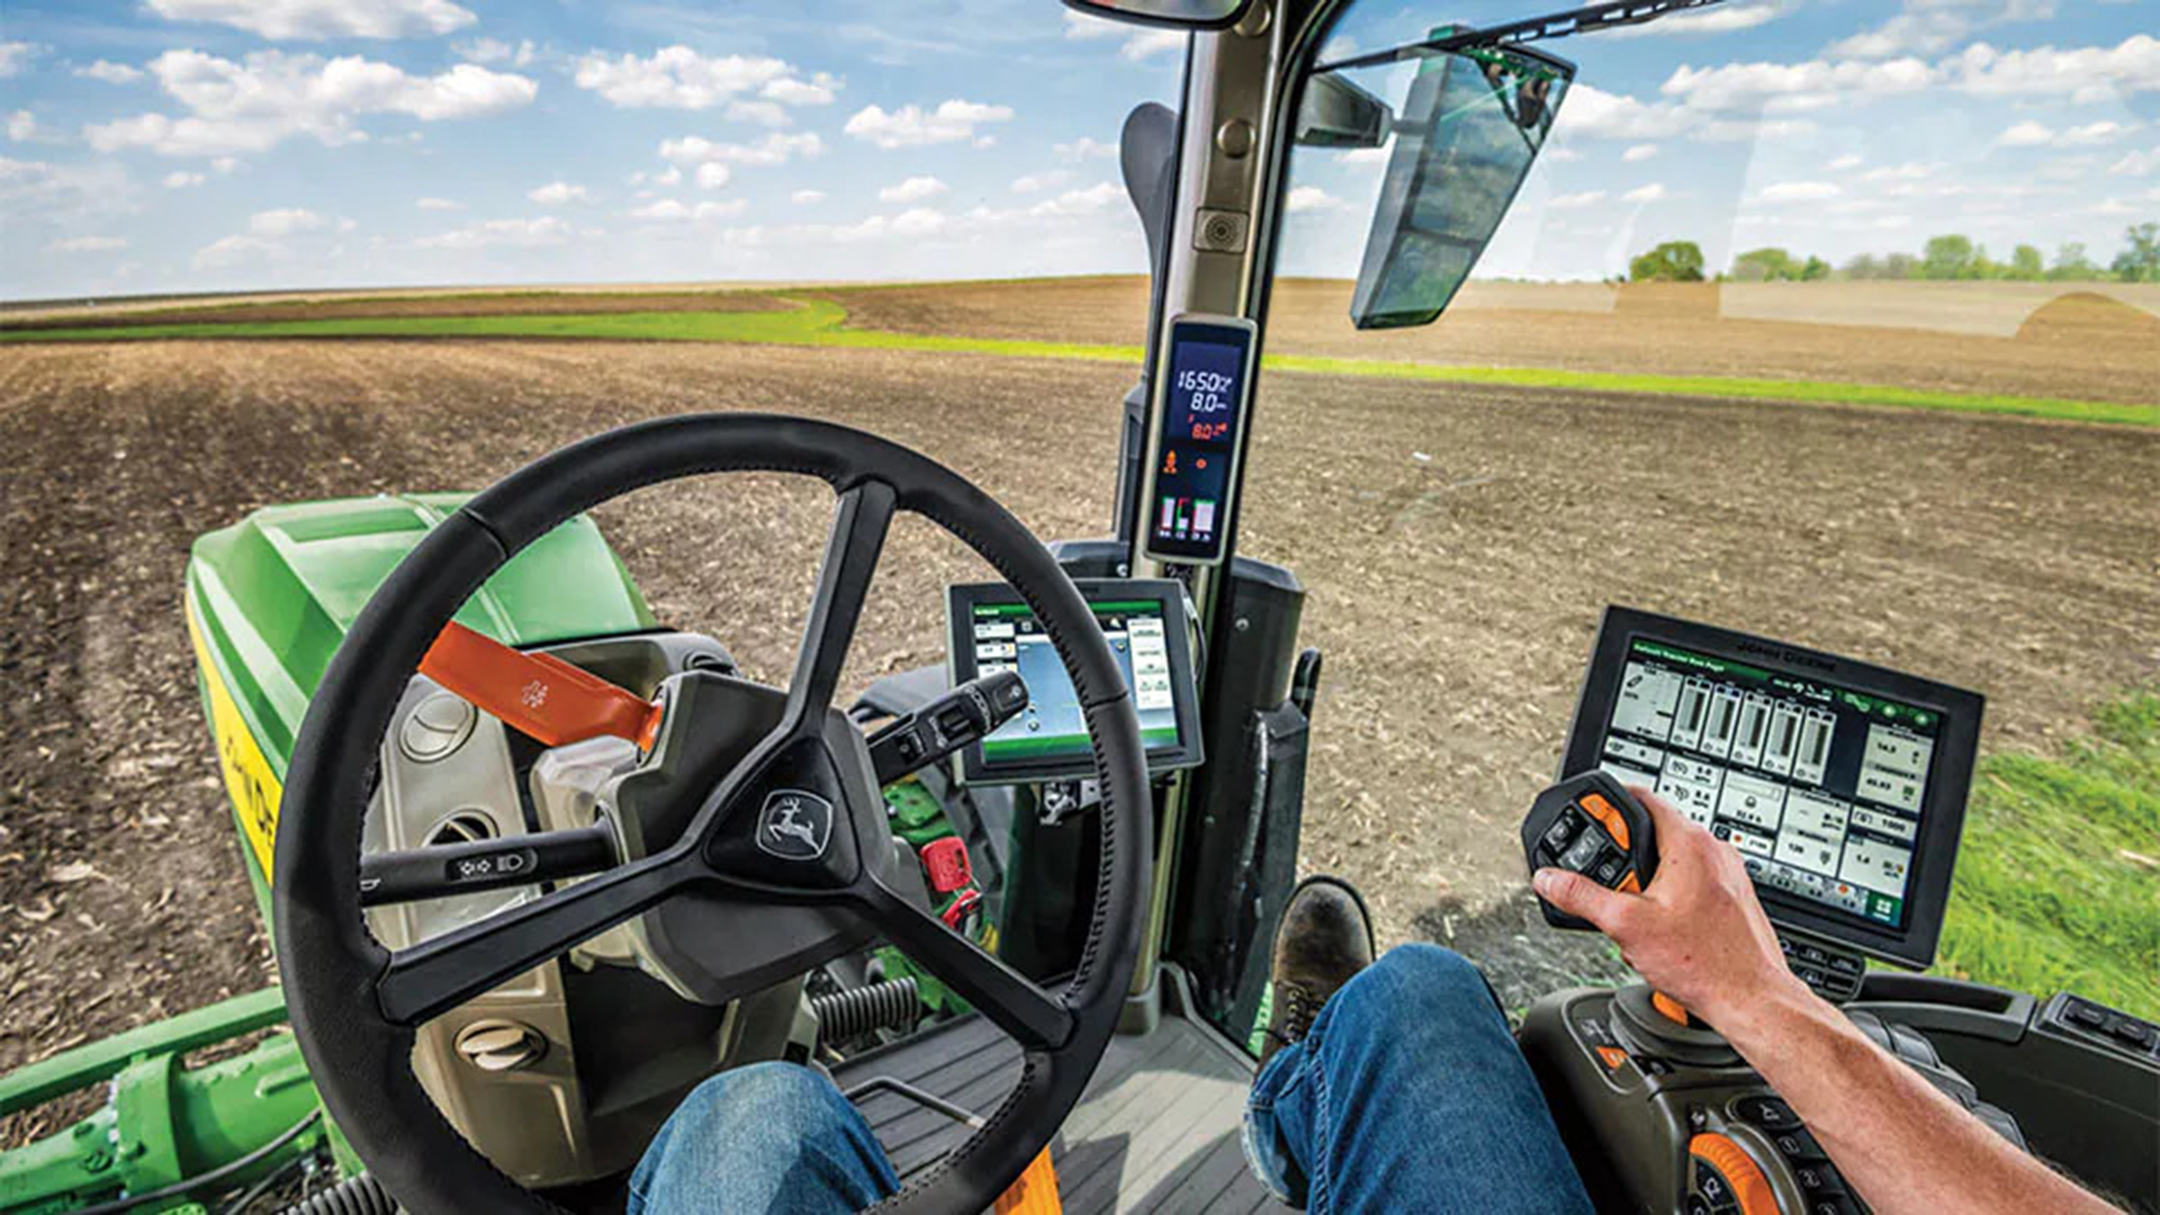 View from inside a tractor showing the computer equipment farmers interact with when using the vehicle